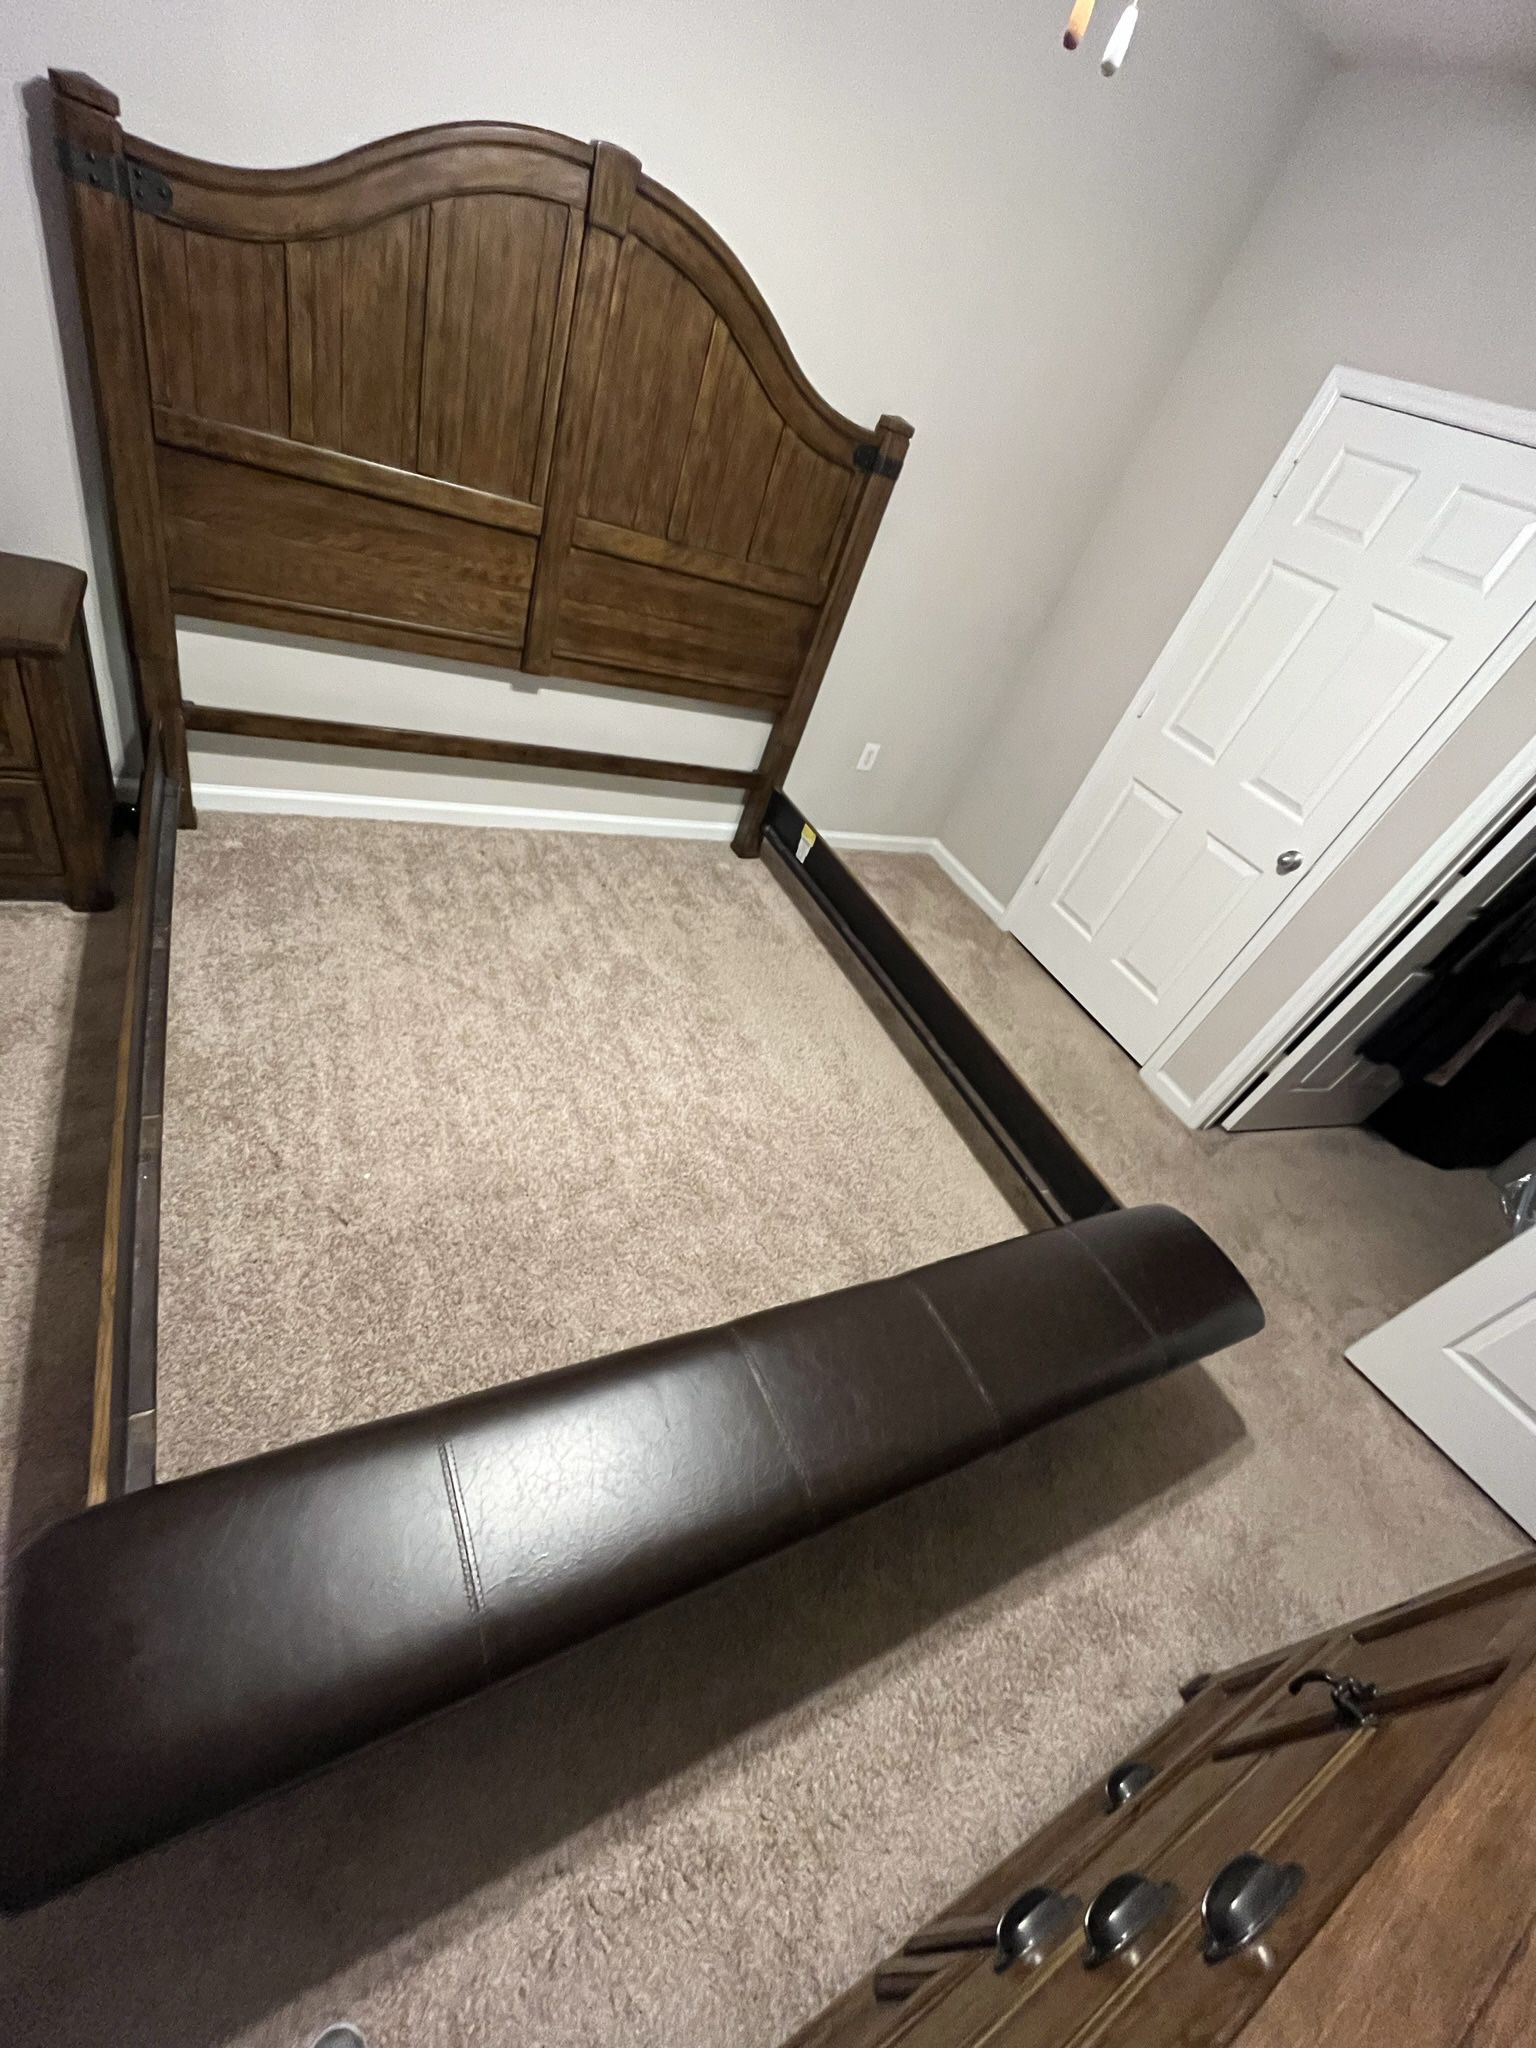 King Bed Frame With Slat Supports